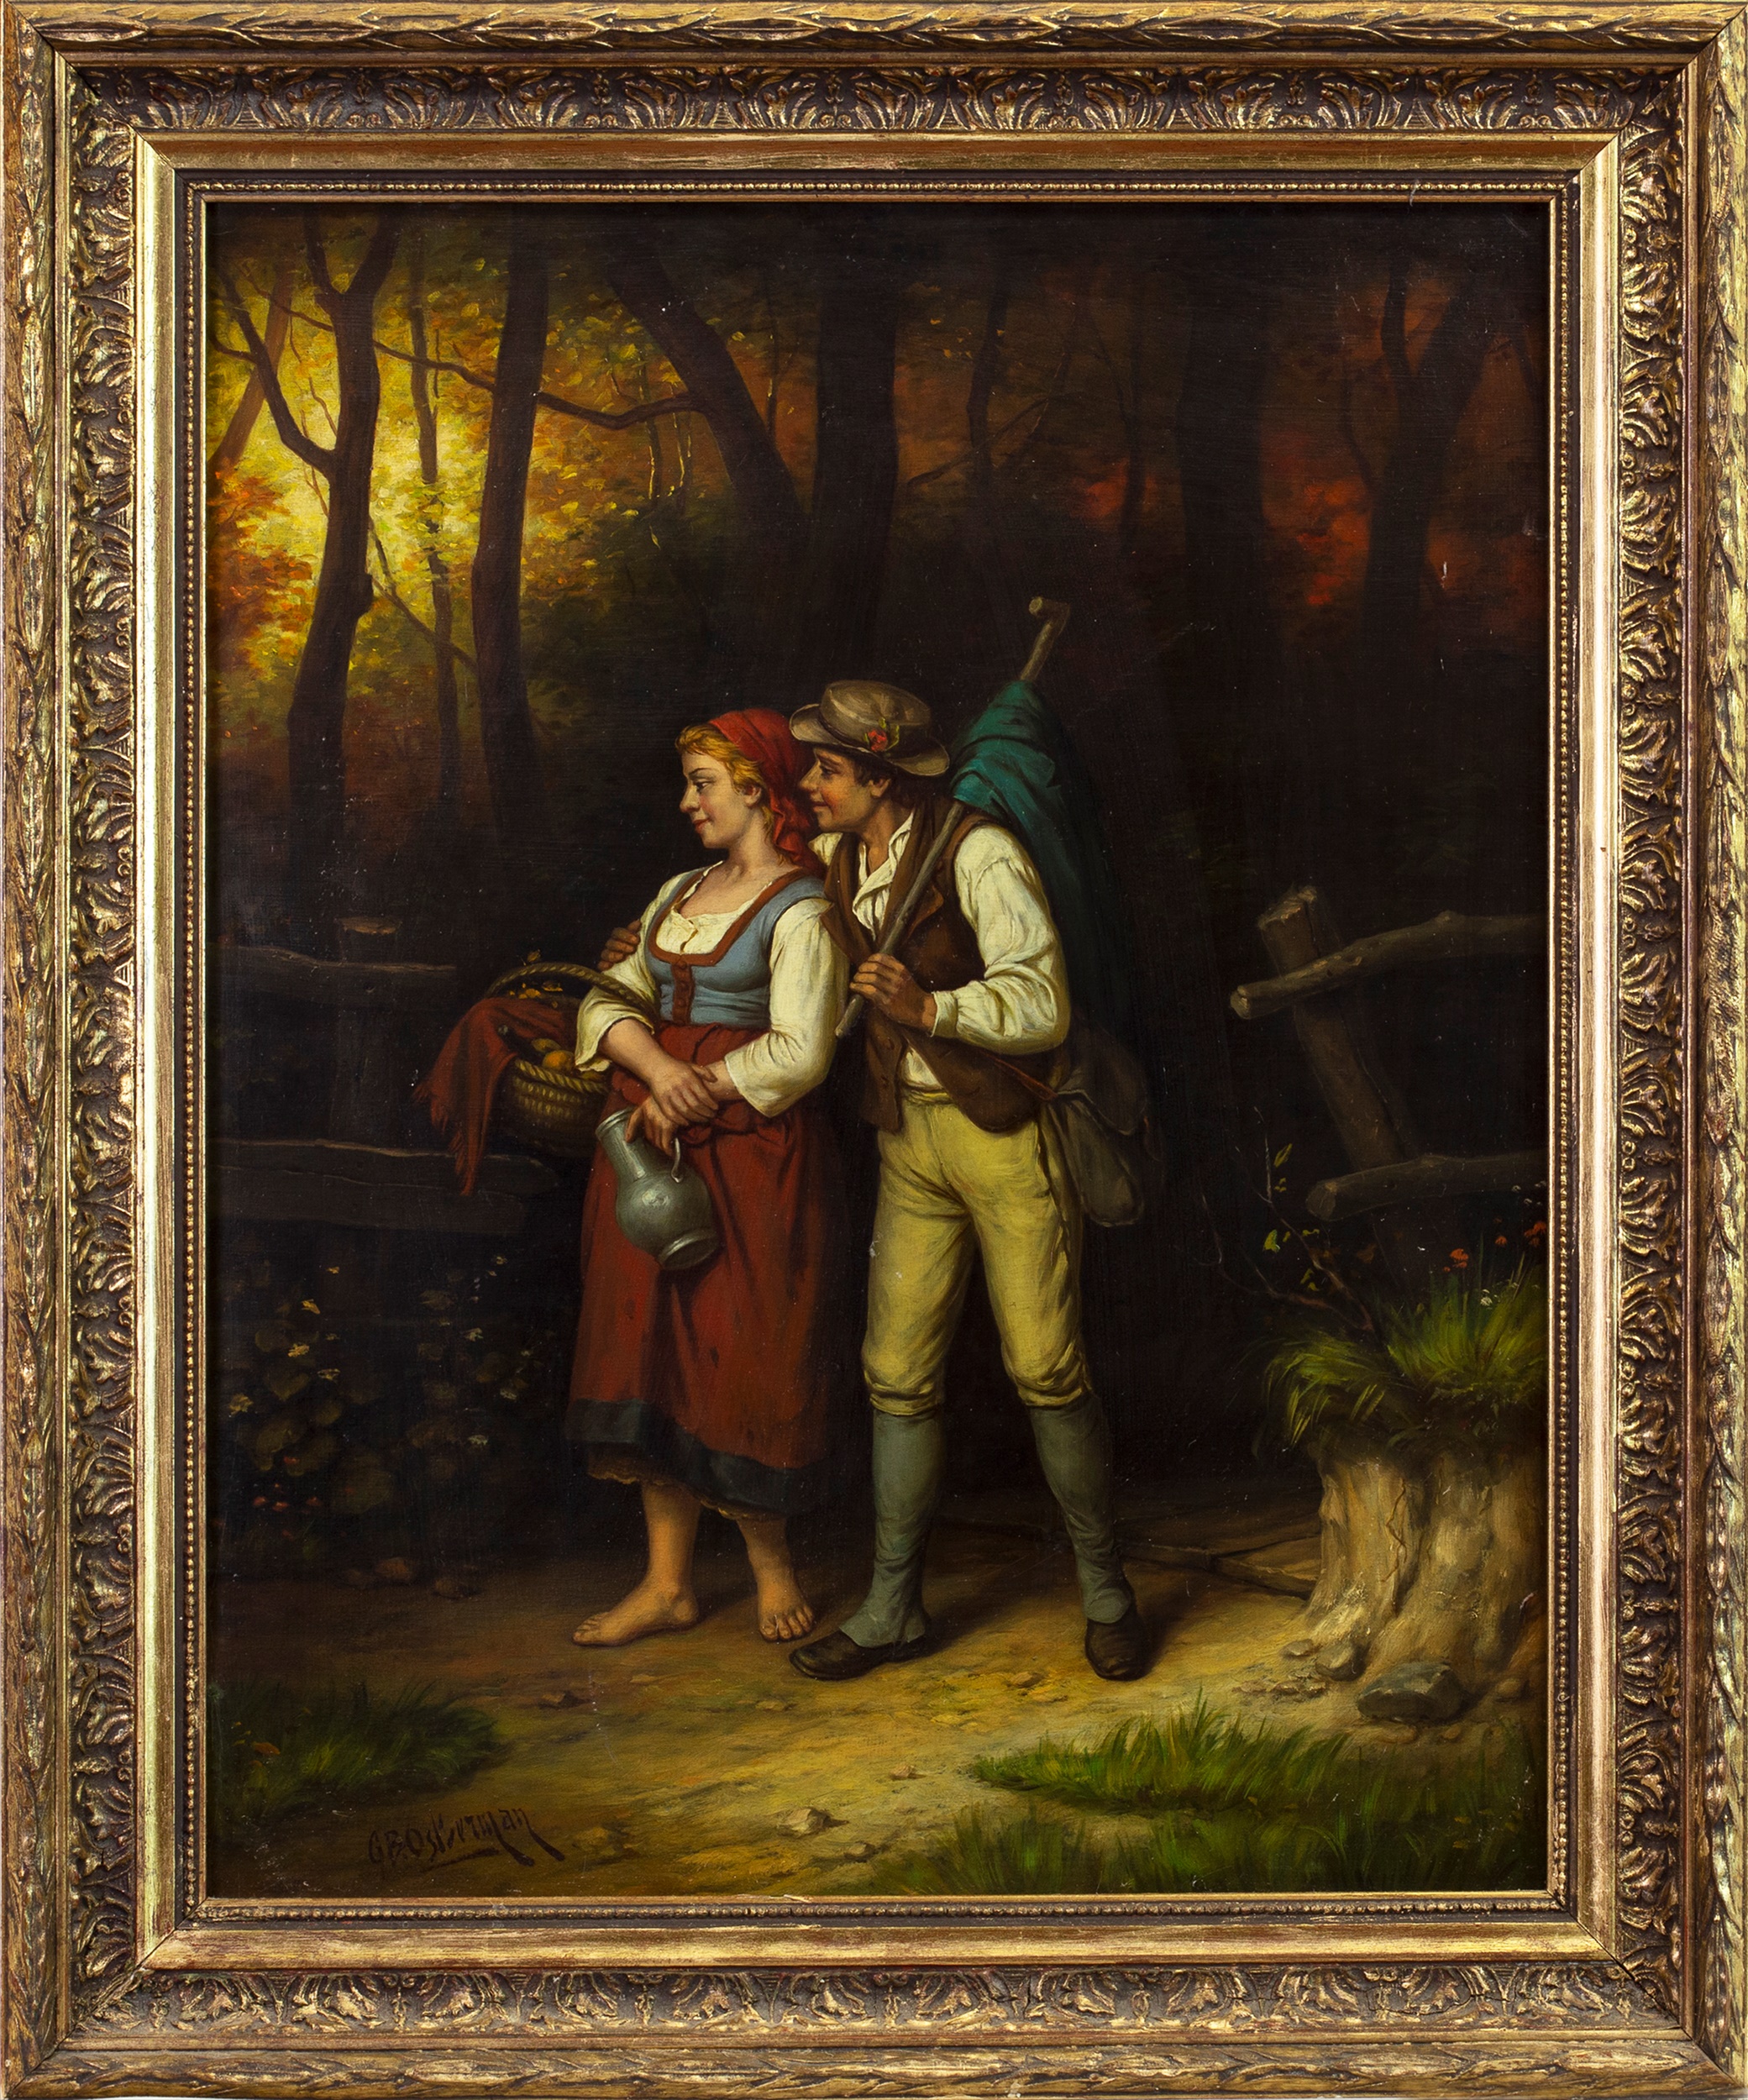 COURTING COUPLE, AN OIL BY